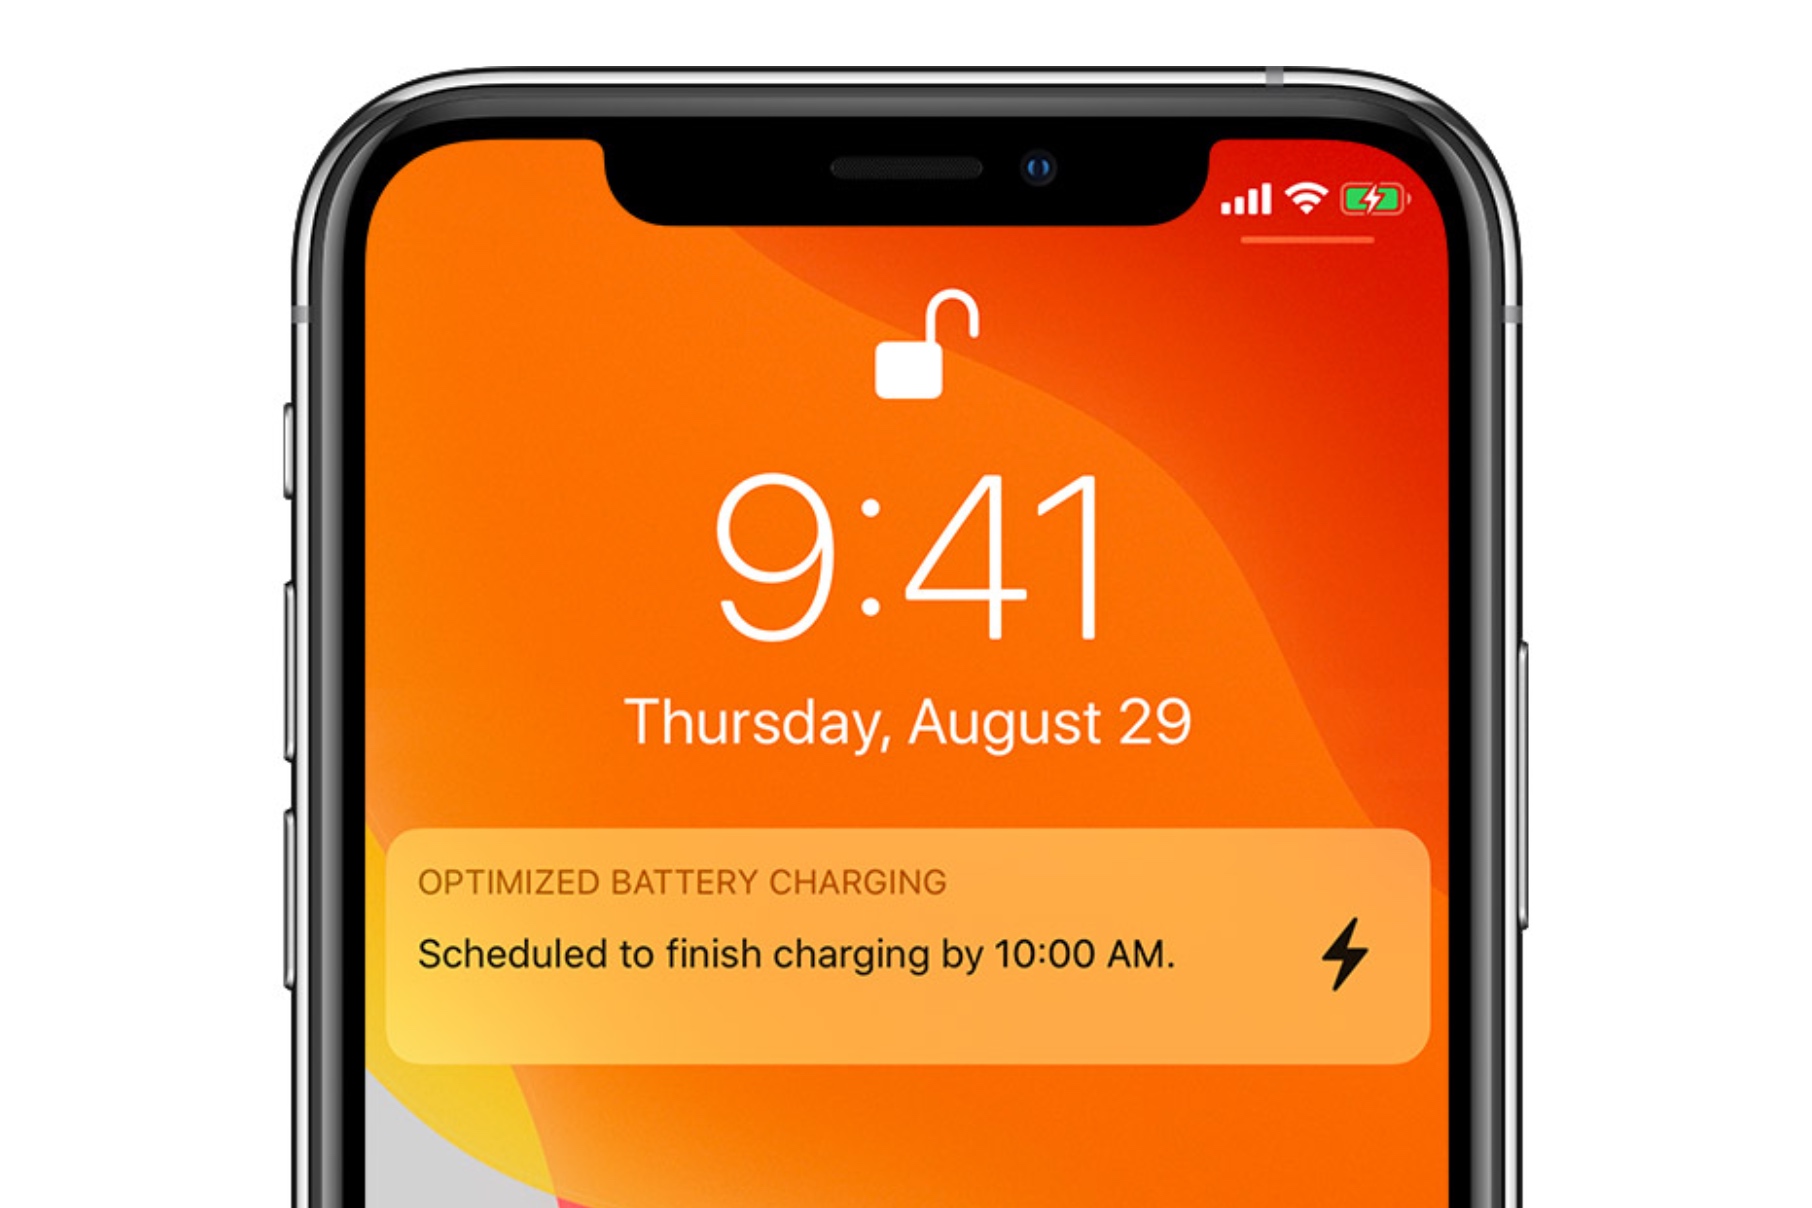 ios-13-iphone-features-what-is-optimized-battery-charging-9to5mac